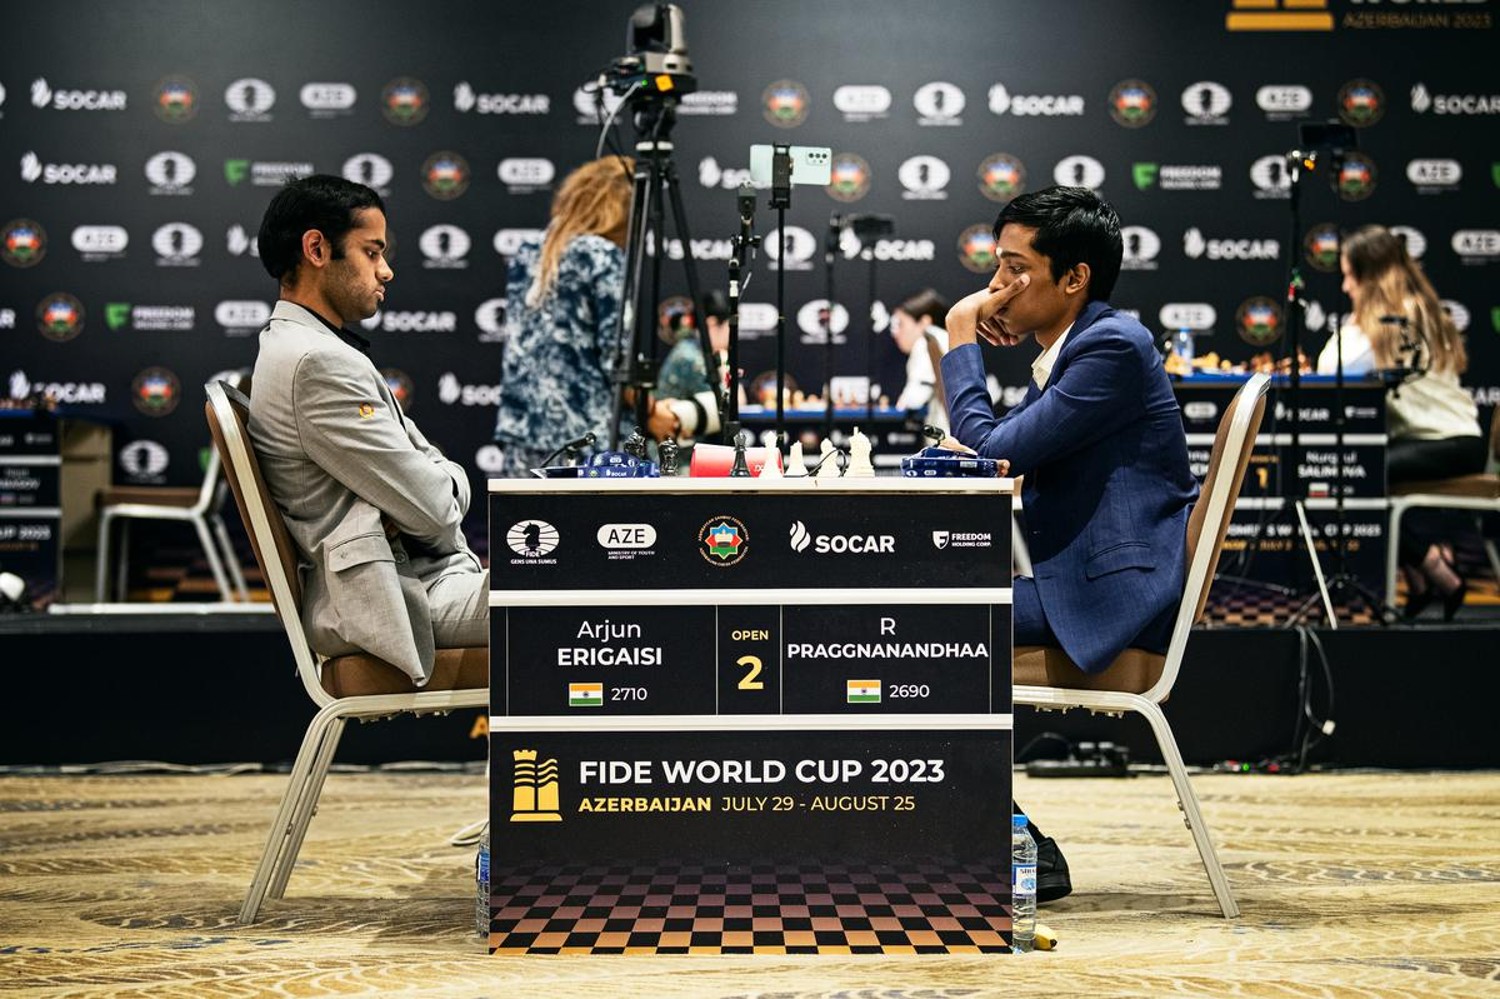 Fabiano Caruana Wins The Candidates Tournament, Becomes First